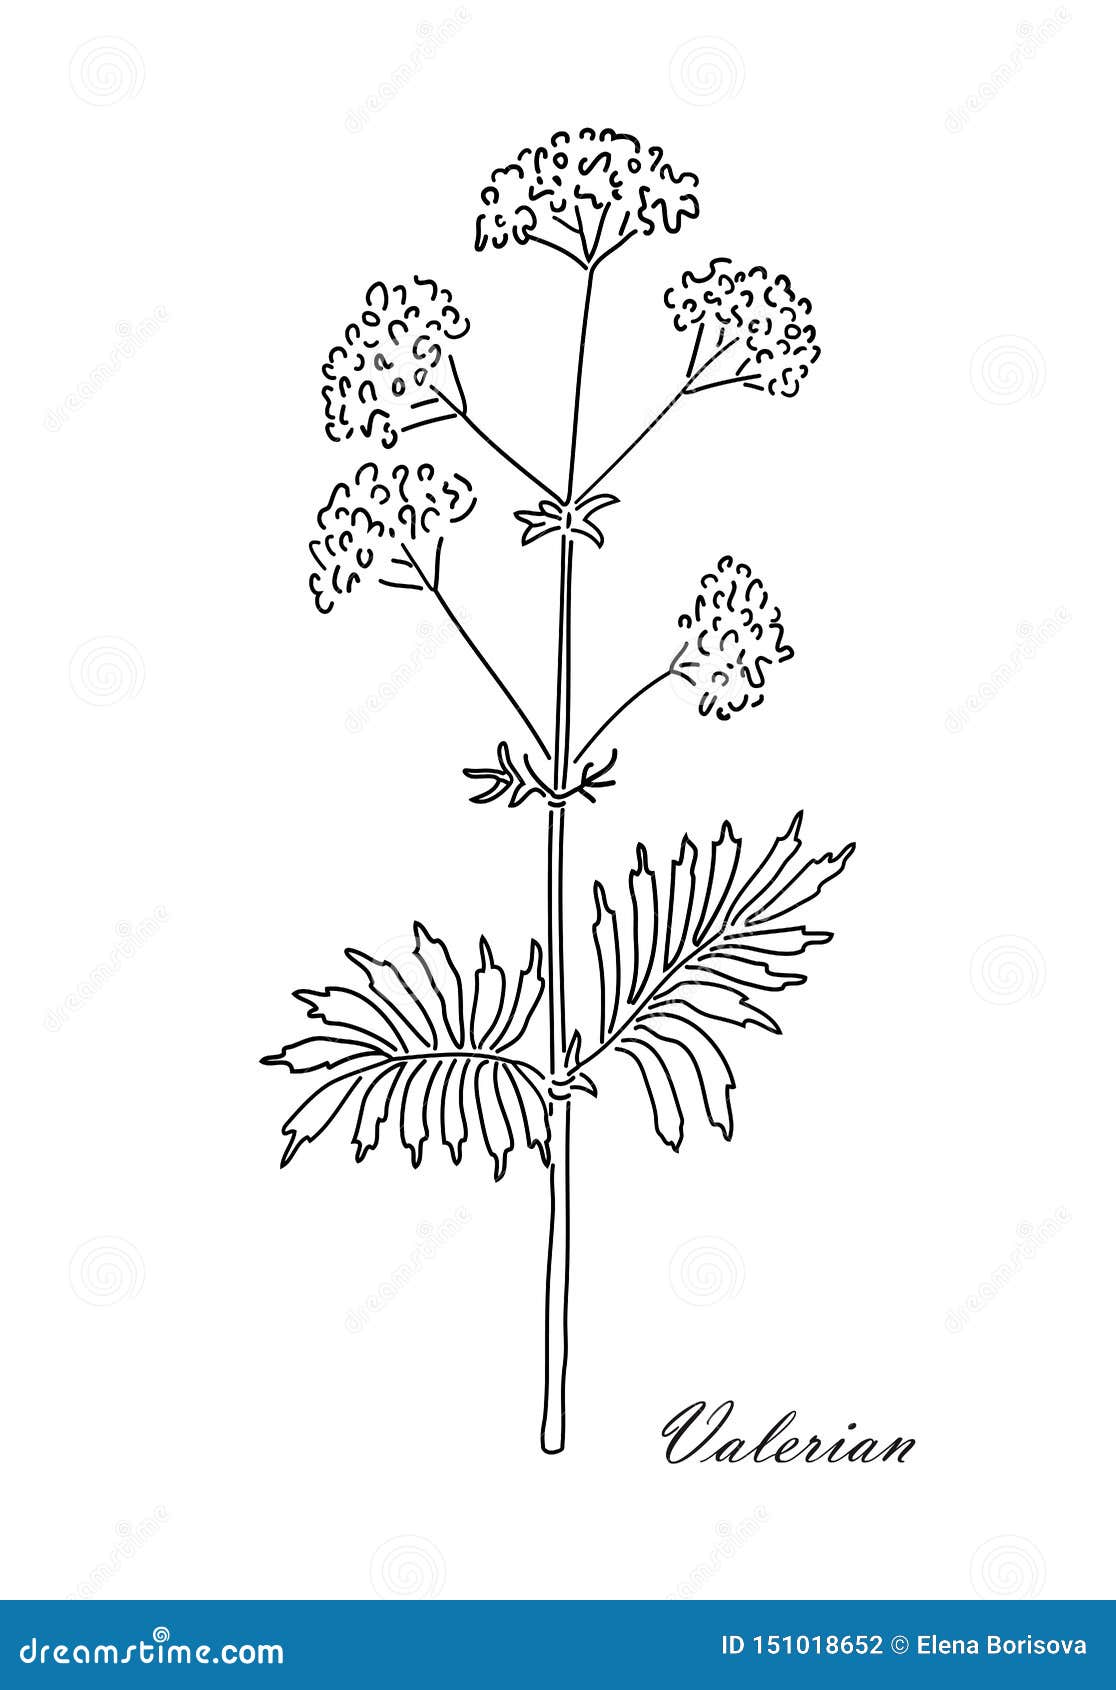 Valerian Herb Isolated on White Background. Line Art Style. Stock ...